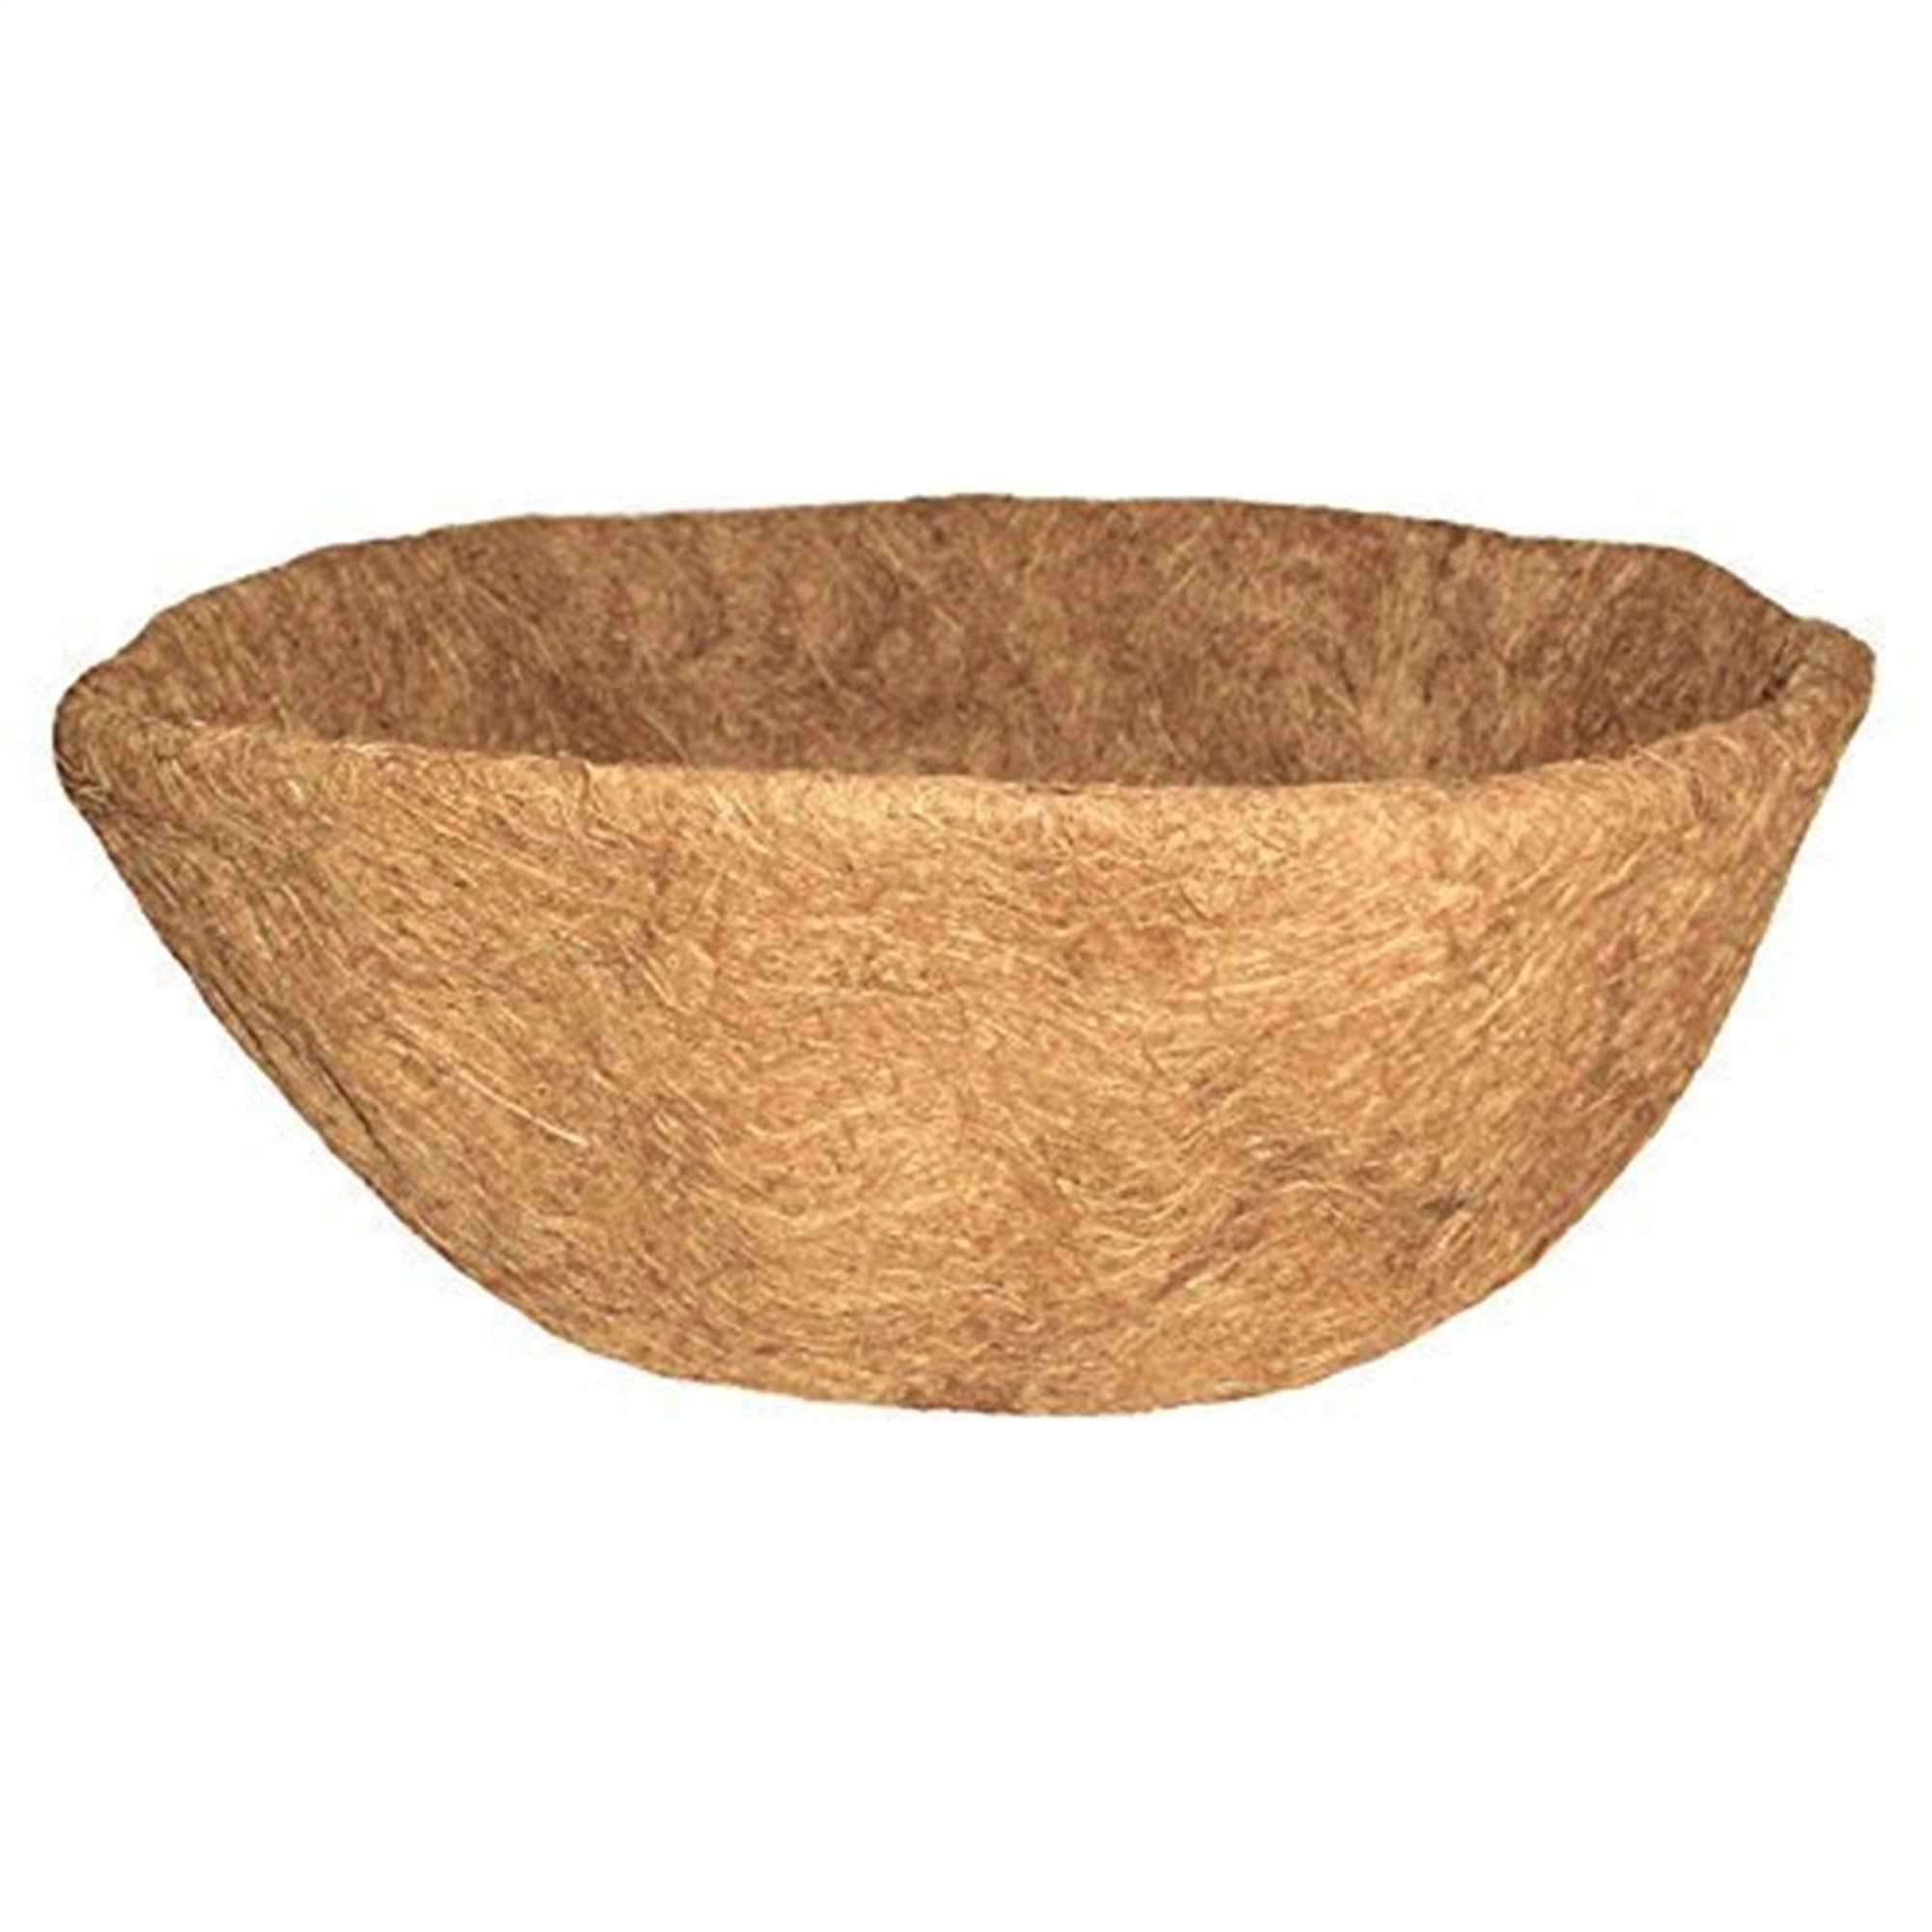 Gardener Select Outdoor Round Coco Liner For Flower Pot Planters and Hanging Baskets, Brown, 12" (Pack of 1)